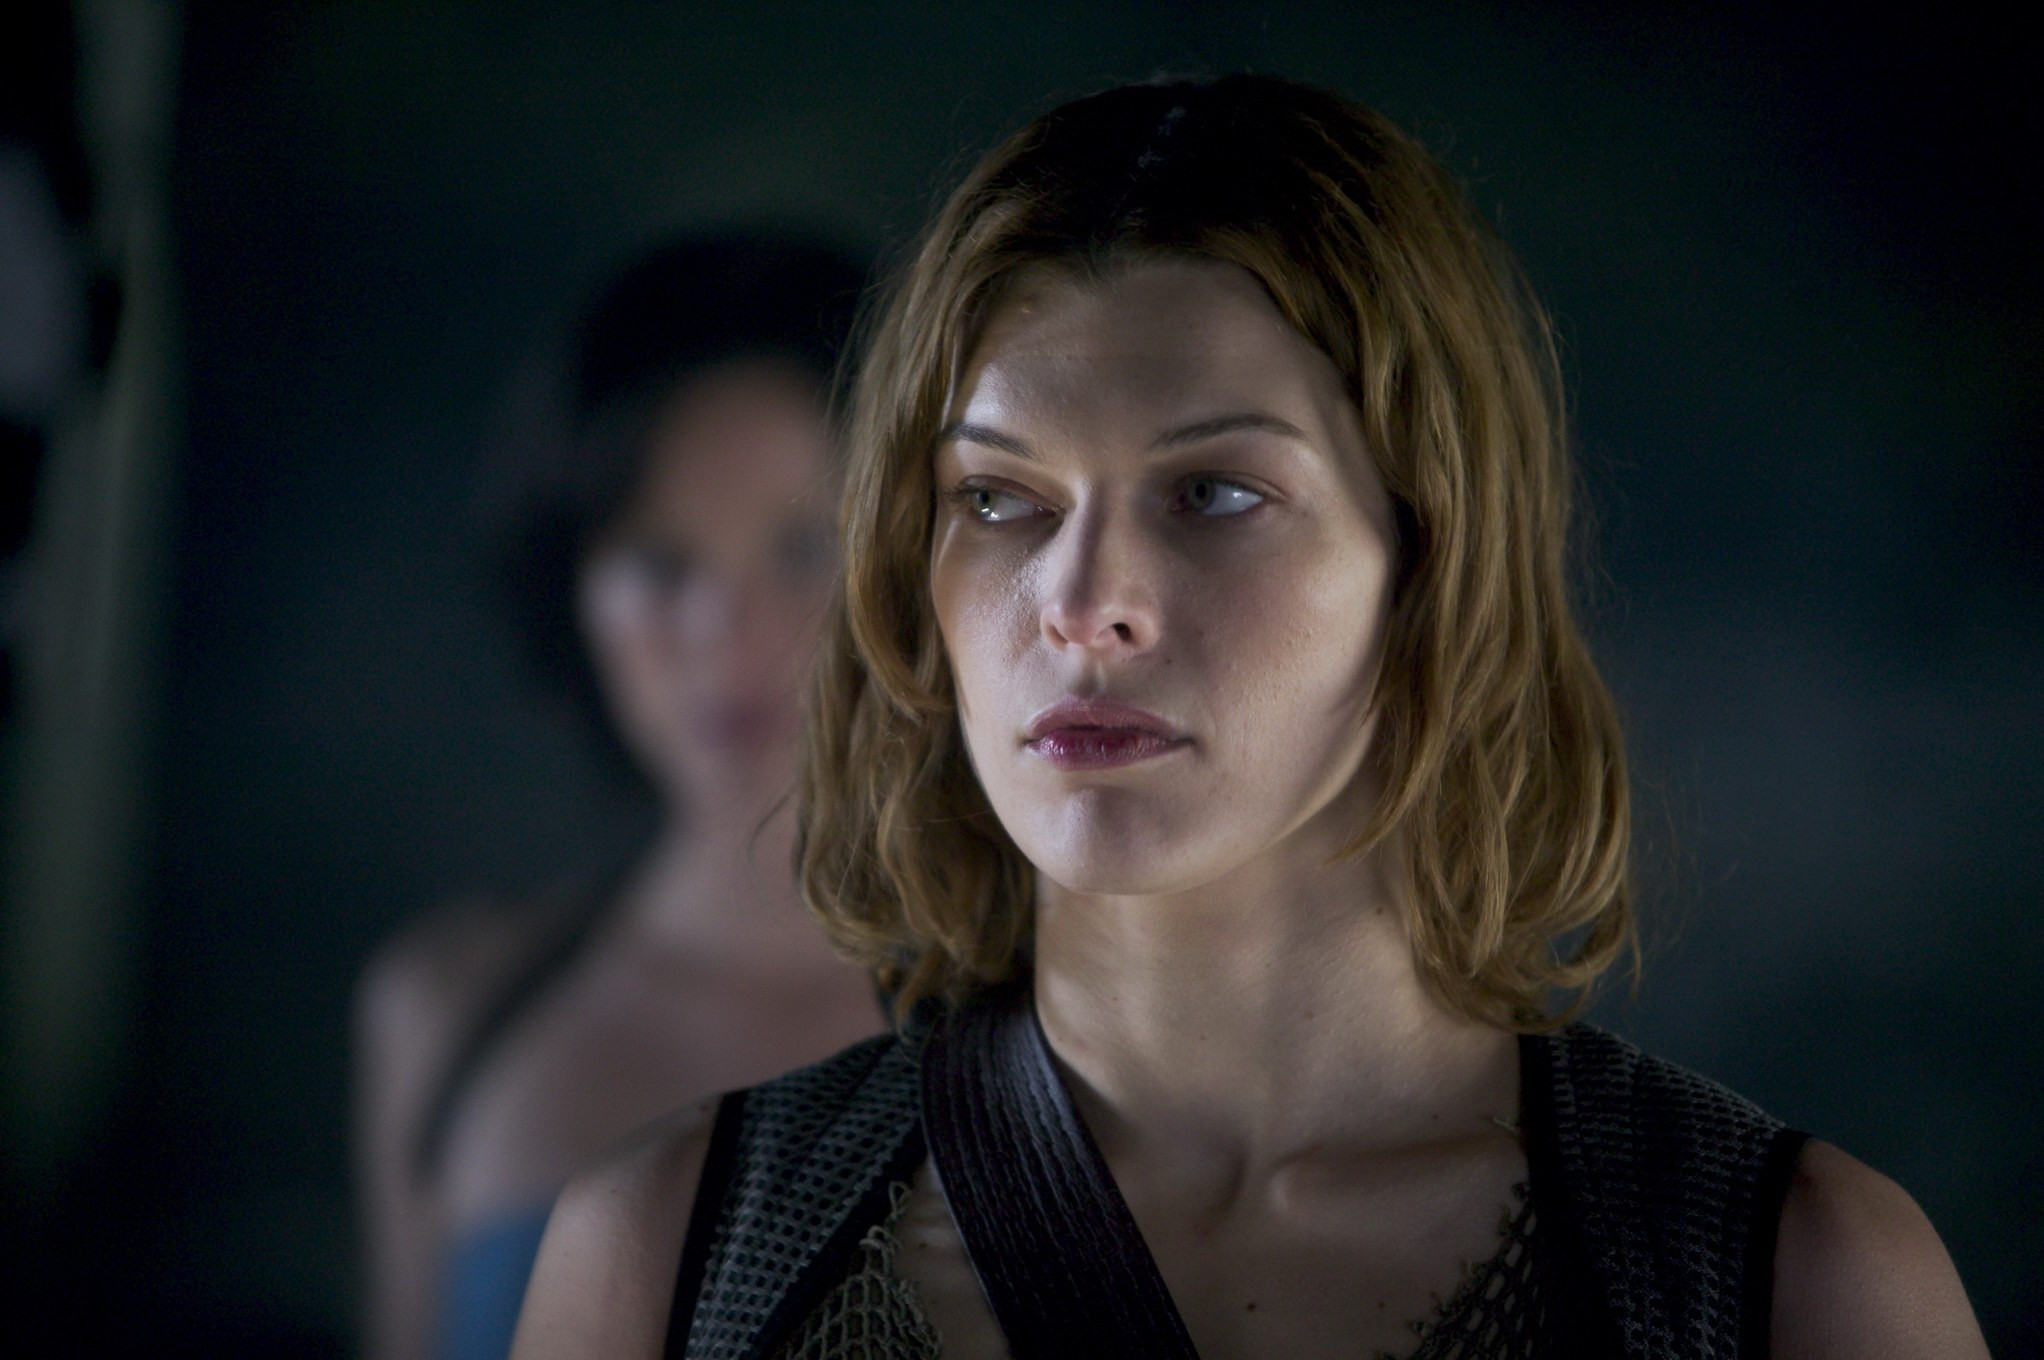 Milla Jovovich looking hot  armed to the teeth in the 'Resident Evil: Apocalypse #75233240